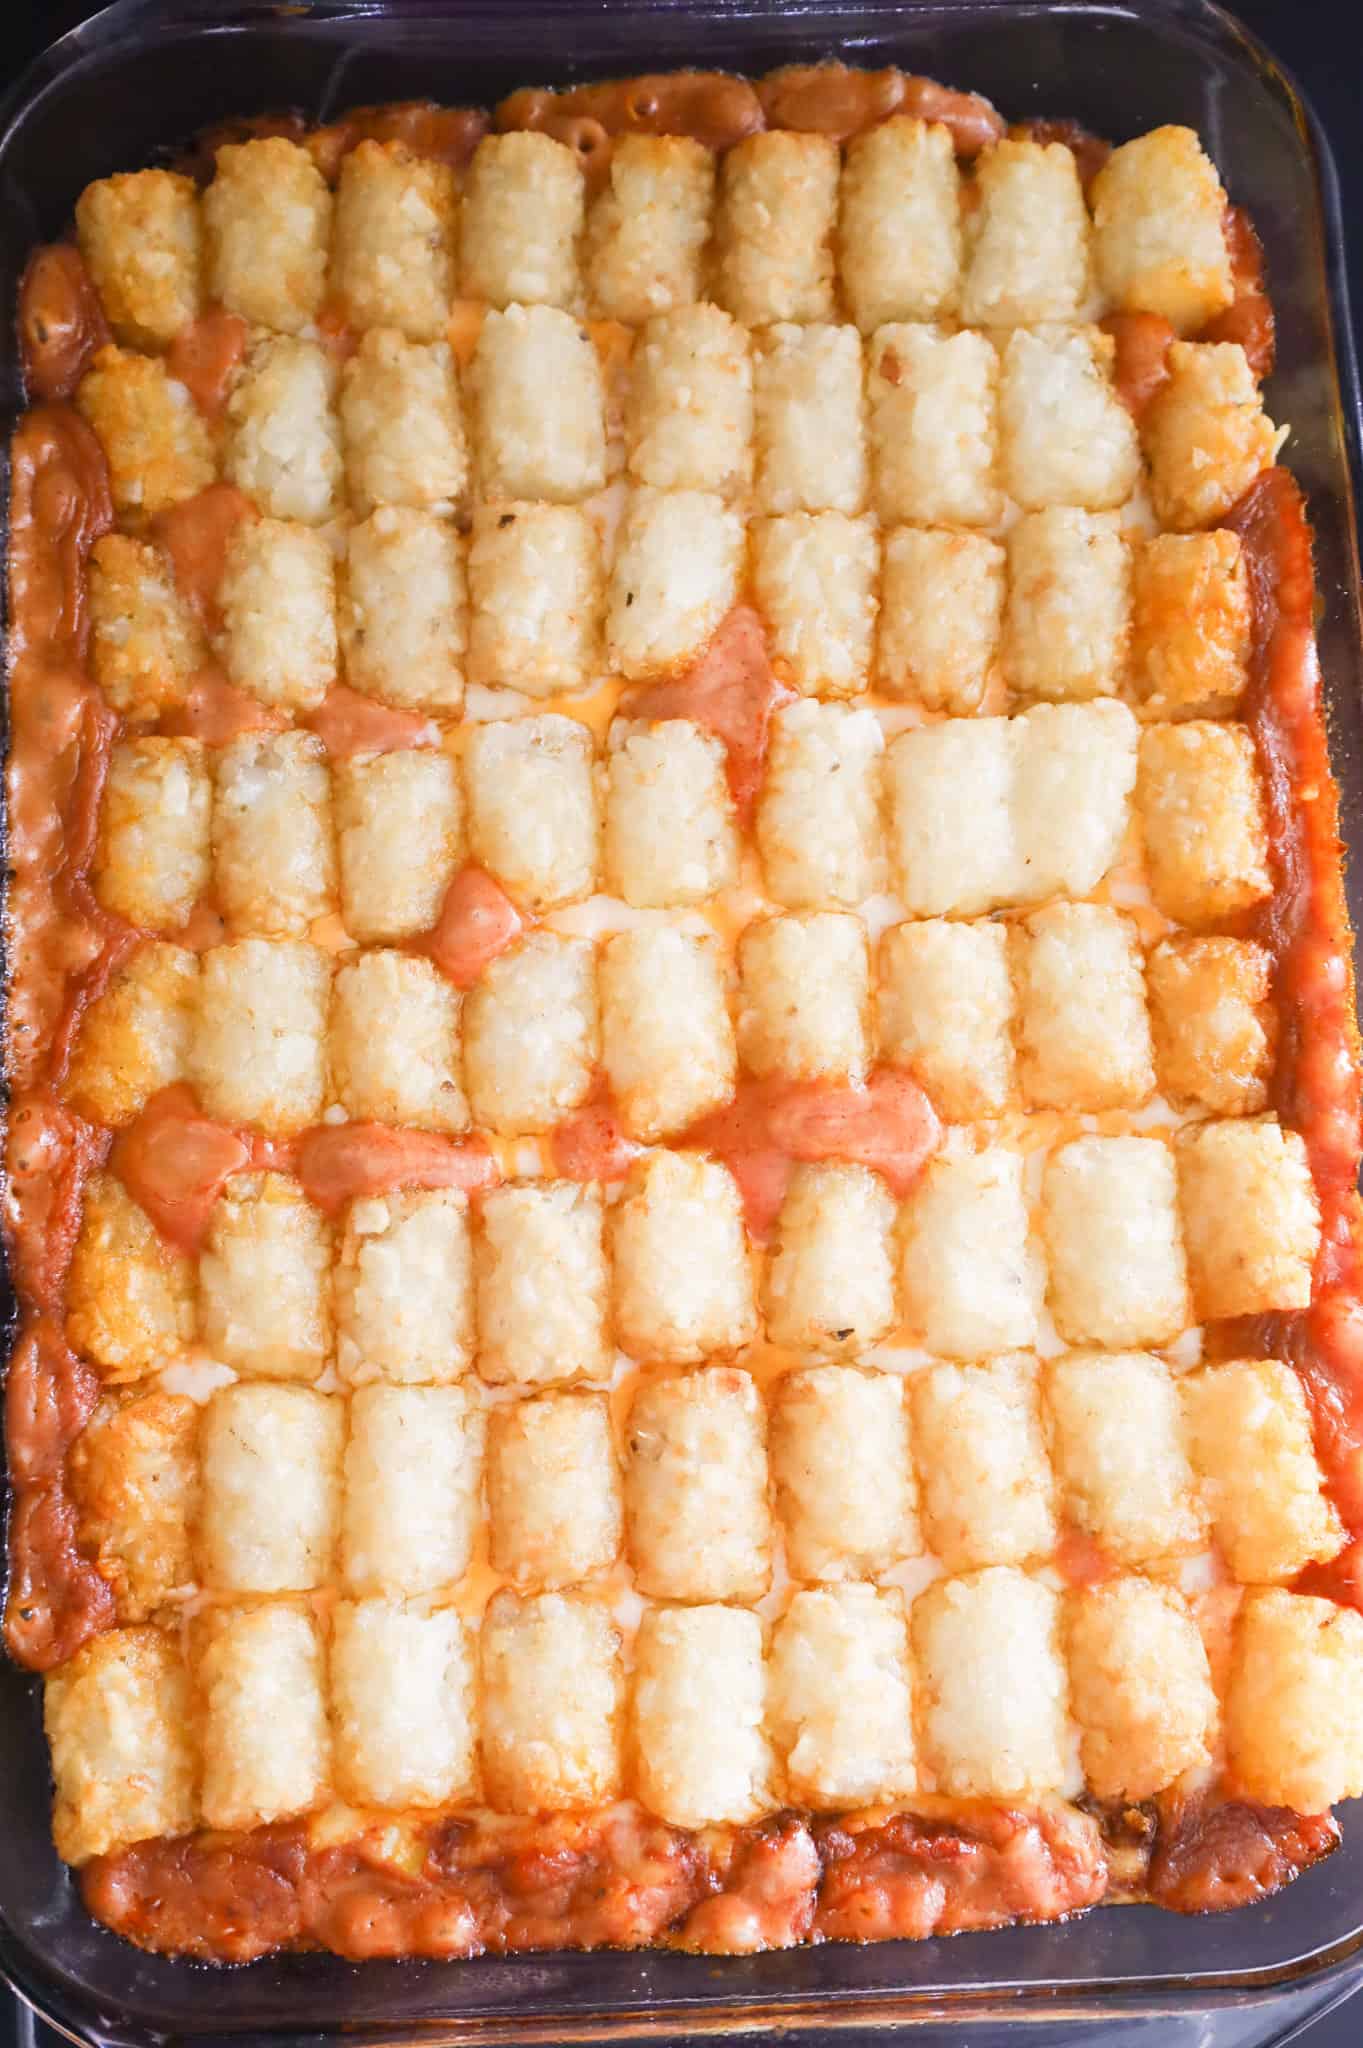 tater tot casserole after cooking